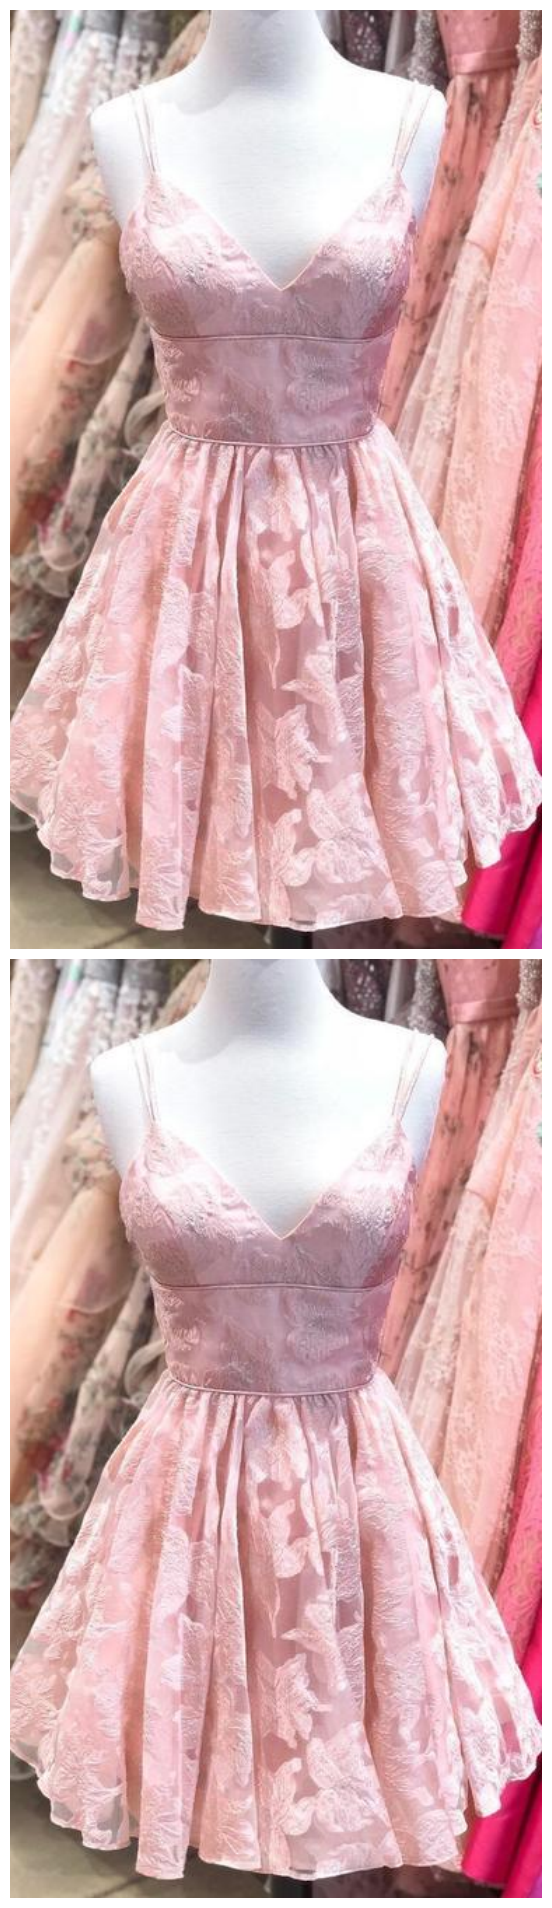 Pink V Neck Sleeveless Lace Homecoming Dresses,a Line Cocktail Dresses